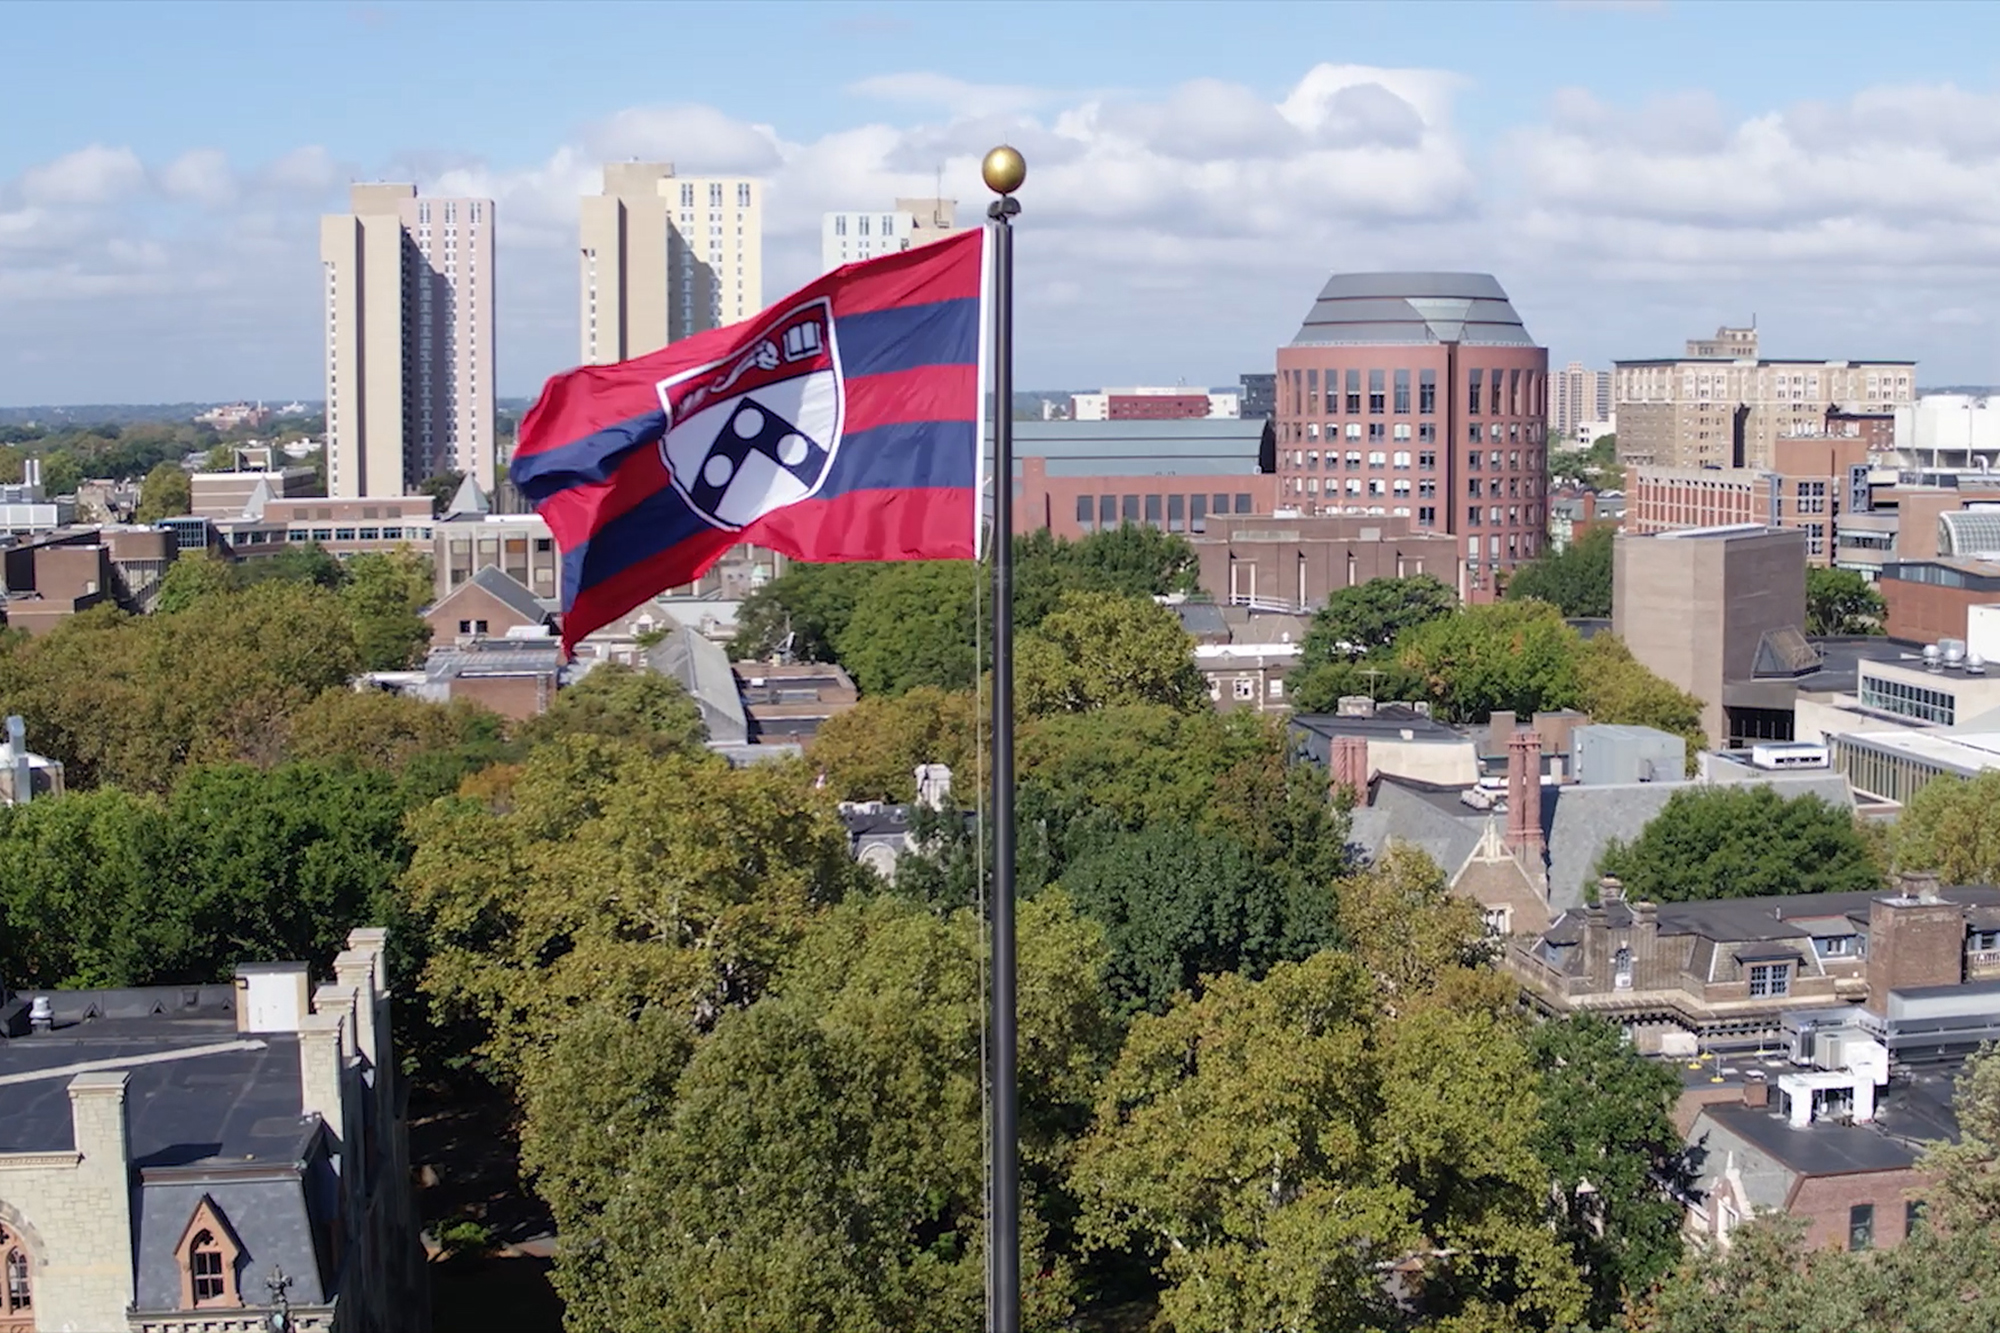 University of Pennsylvania flag flying with campus and the city of Philadelphia in the background.